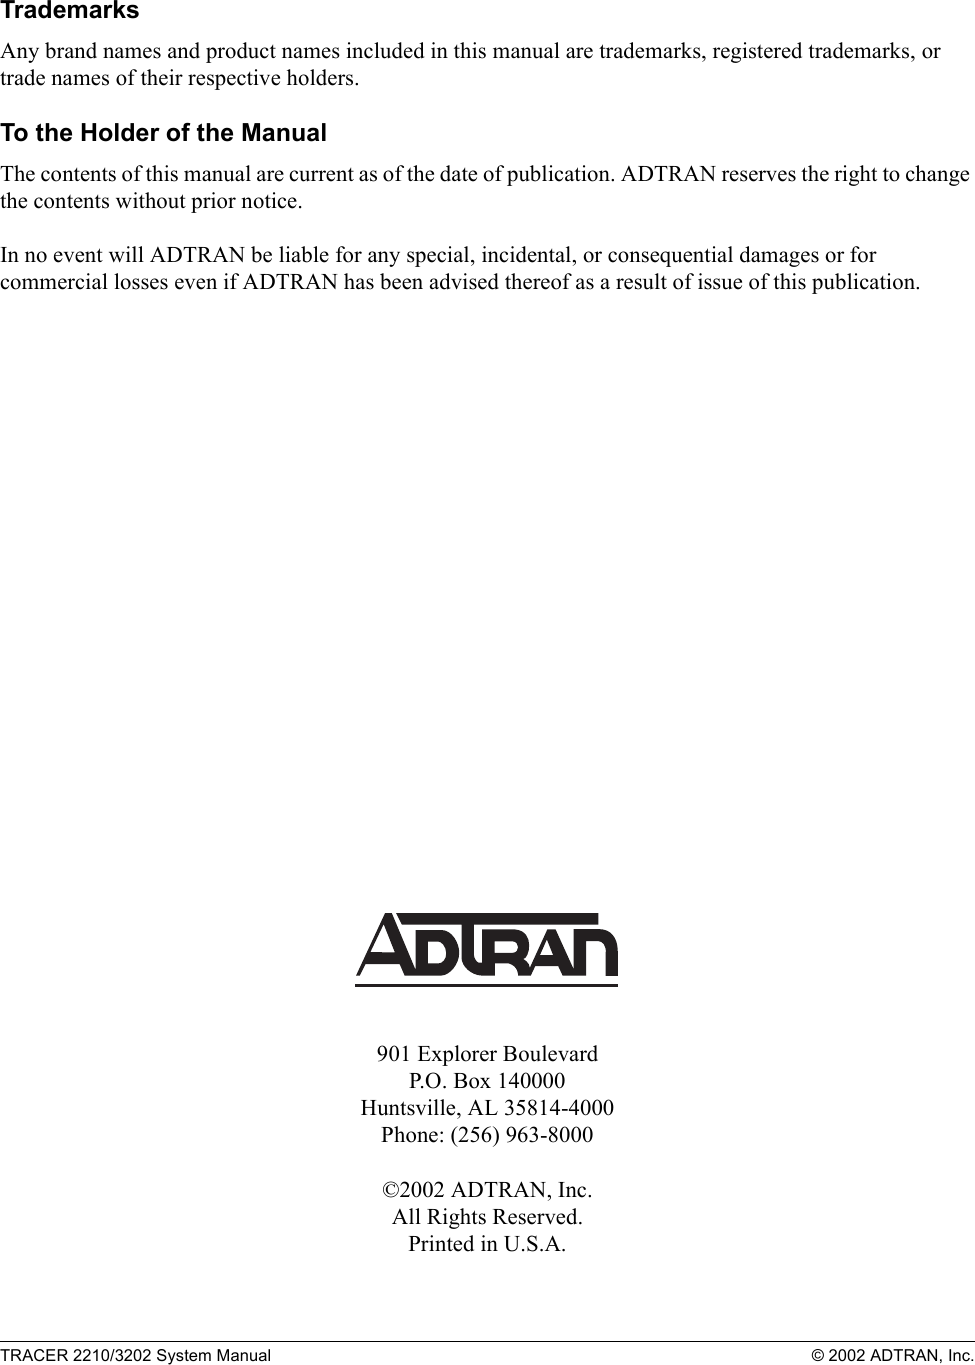 TRACER 2210/3202 System Manual © 2002 ADTRAN, Inc.TrademarksAny brand names and product names included in this manual are trademarks, registered trademarks, or trade names of their respective holders.To the Holder of the ManualThe contents of this manual are current as of the date of publication. ADTRAN reserves the right to change the contents without prior notice.In no event will ADTRAN be liable for any special, incidental, or consequential damages or for commercial losses even if ADTRAN has been advised thereof as a result of issue of this publication.901 Explorer BoulevardP.O. Box 140000Huntsville, AL 35814-4000Phone: (256) 963-8000©2002 ADTRAN, Inc.All Rights Reserved.Printed in U.S.A.